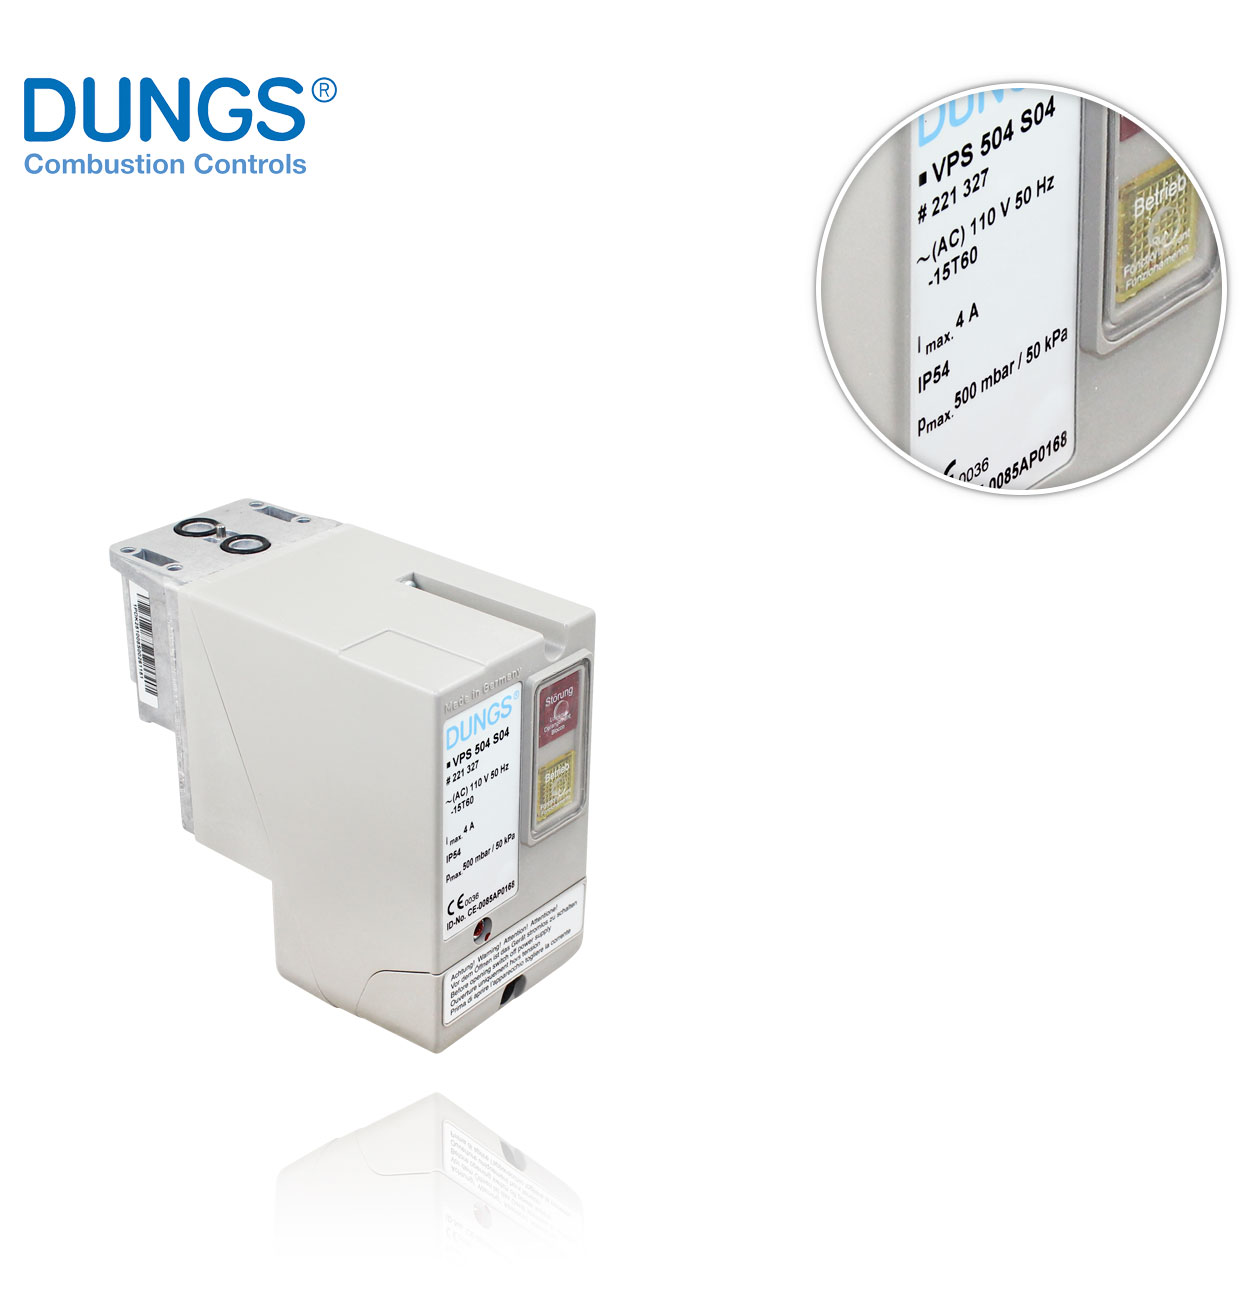 VPS 504 S04 110V 50Hz (221327) DUNGS LEAK CONTROL